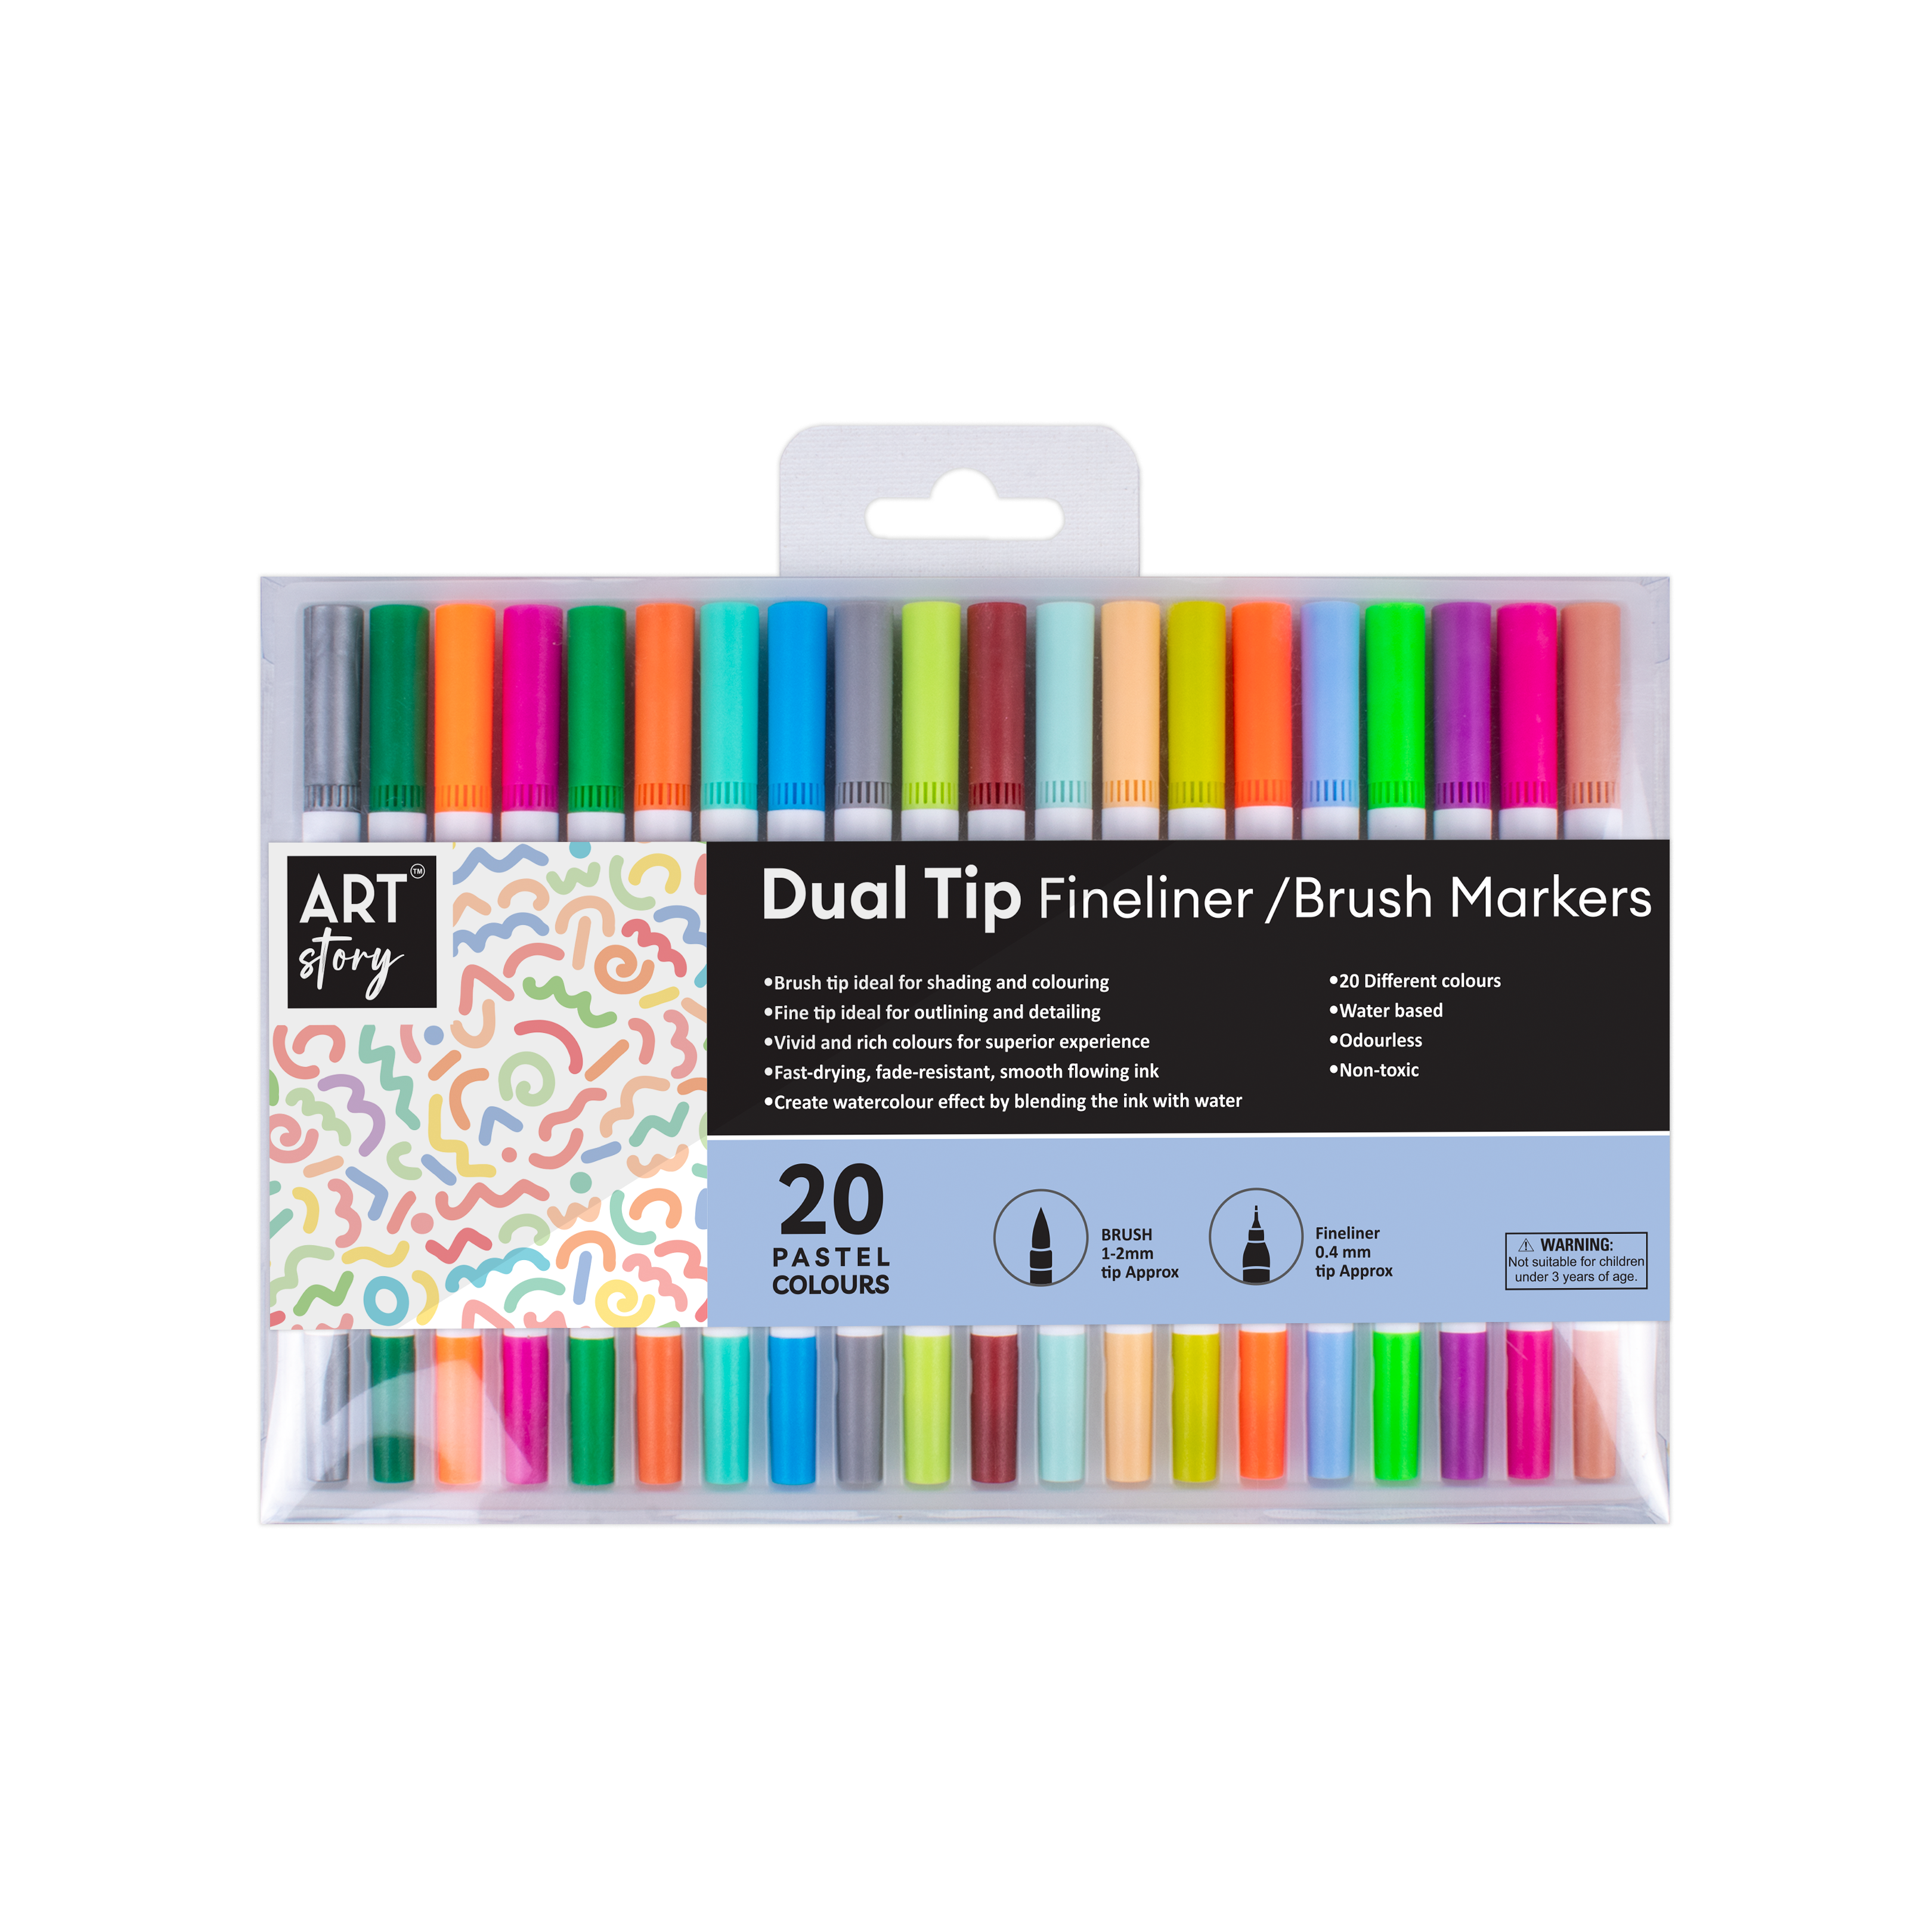 Dual Tip Fineliner/Brush Markers Water Based Pastel Brush 1-2mm Fineliner 0.4mm Tip Approx Pack Of 20pc Blister